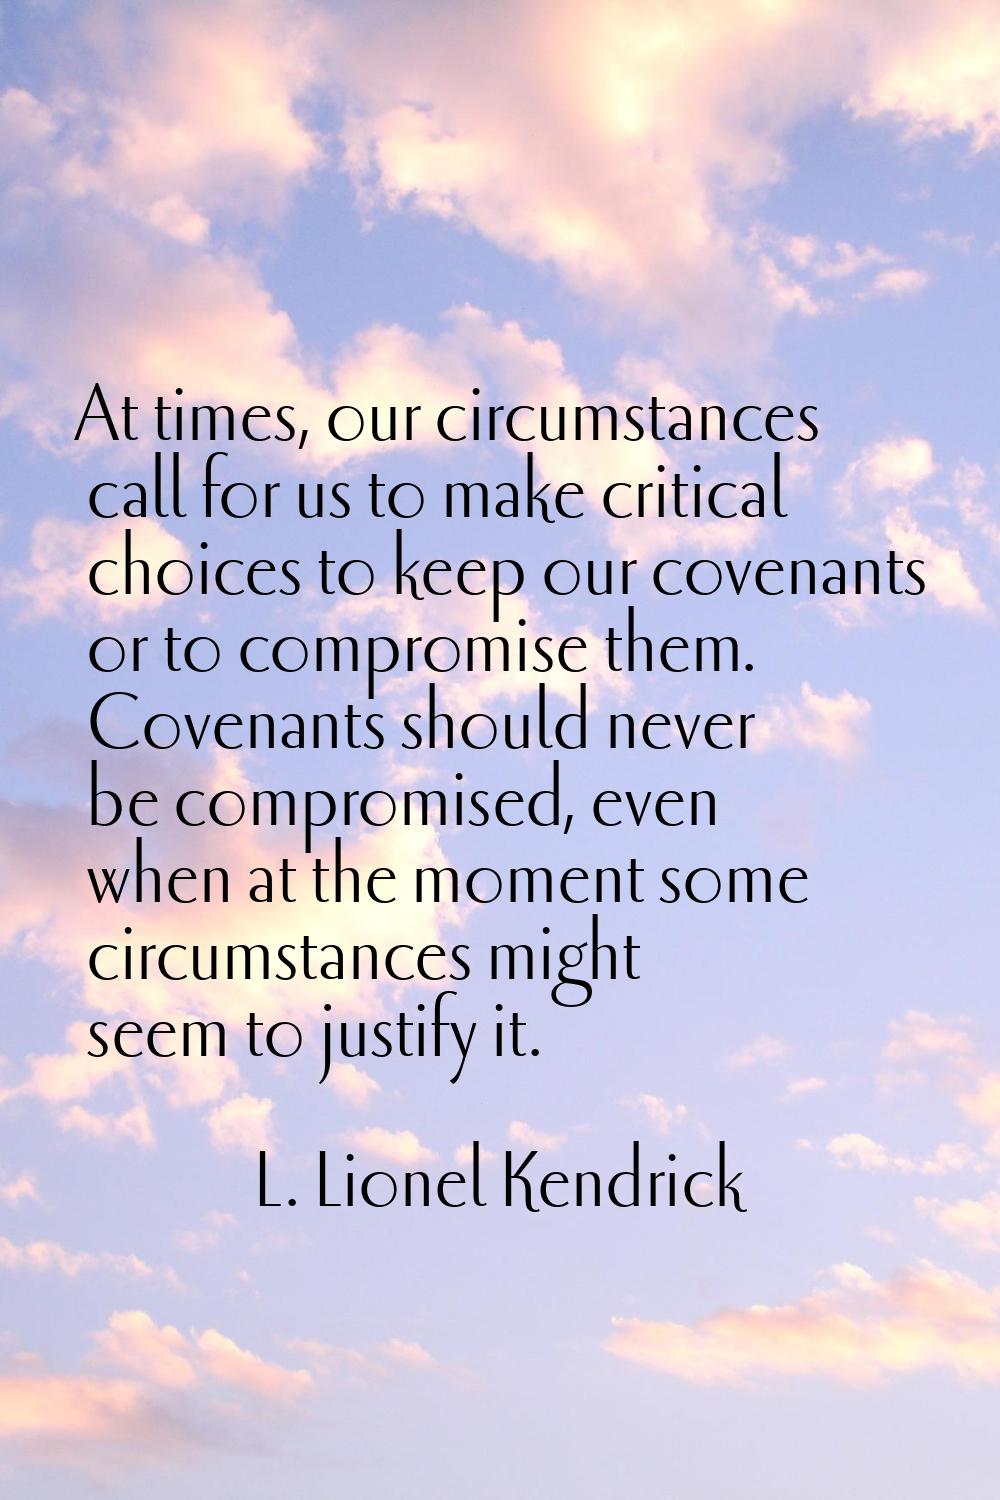 At times, our circumstances call for us to make critical choices to keep our covenants or to compro